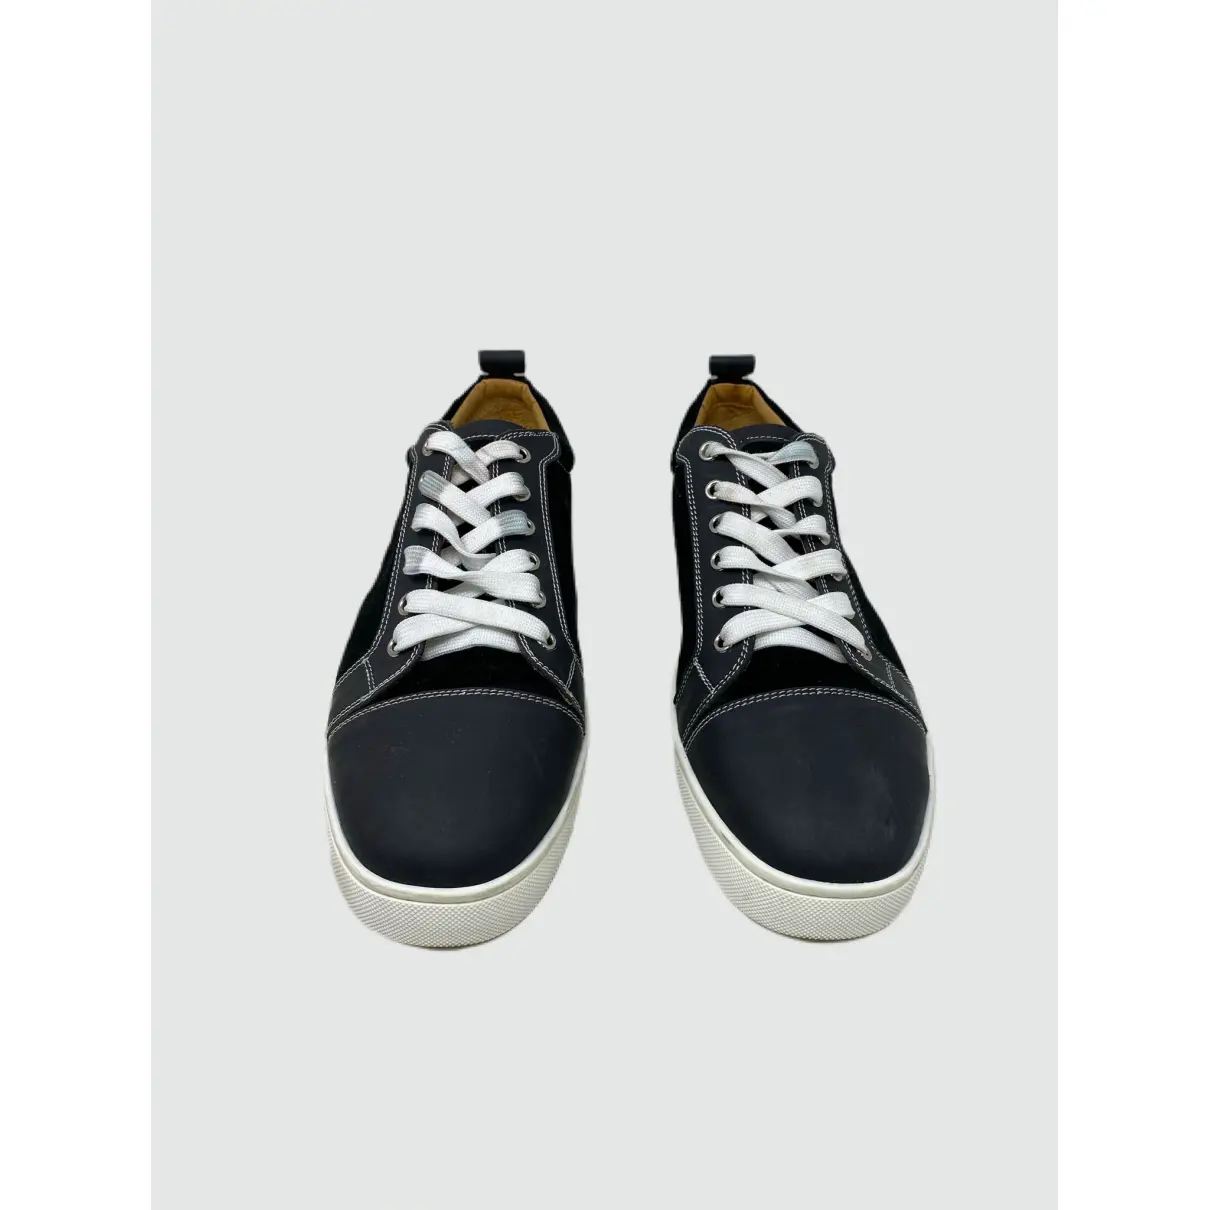 Buy Christian Louboutin Cloth low trainers online